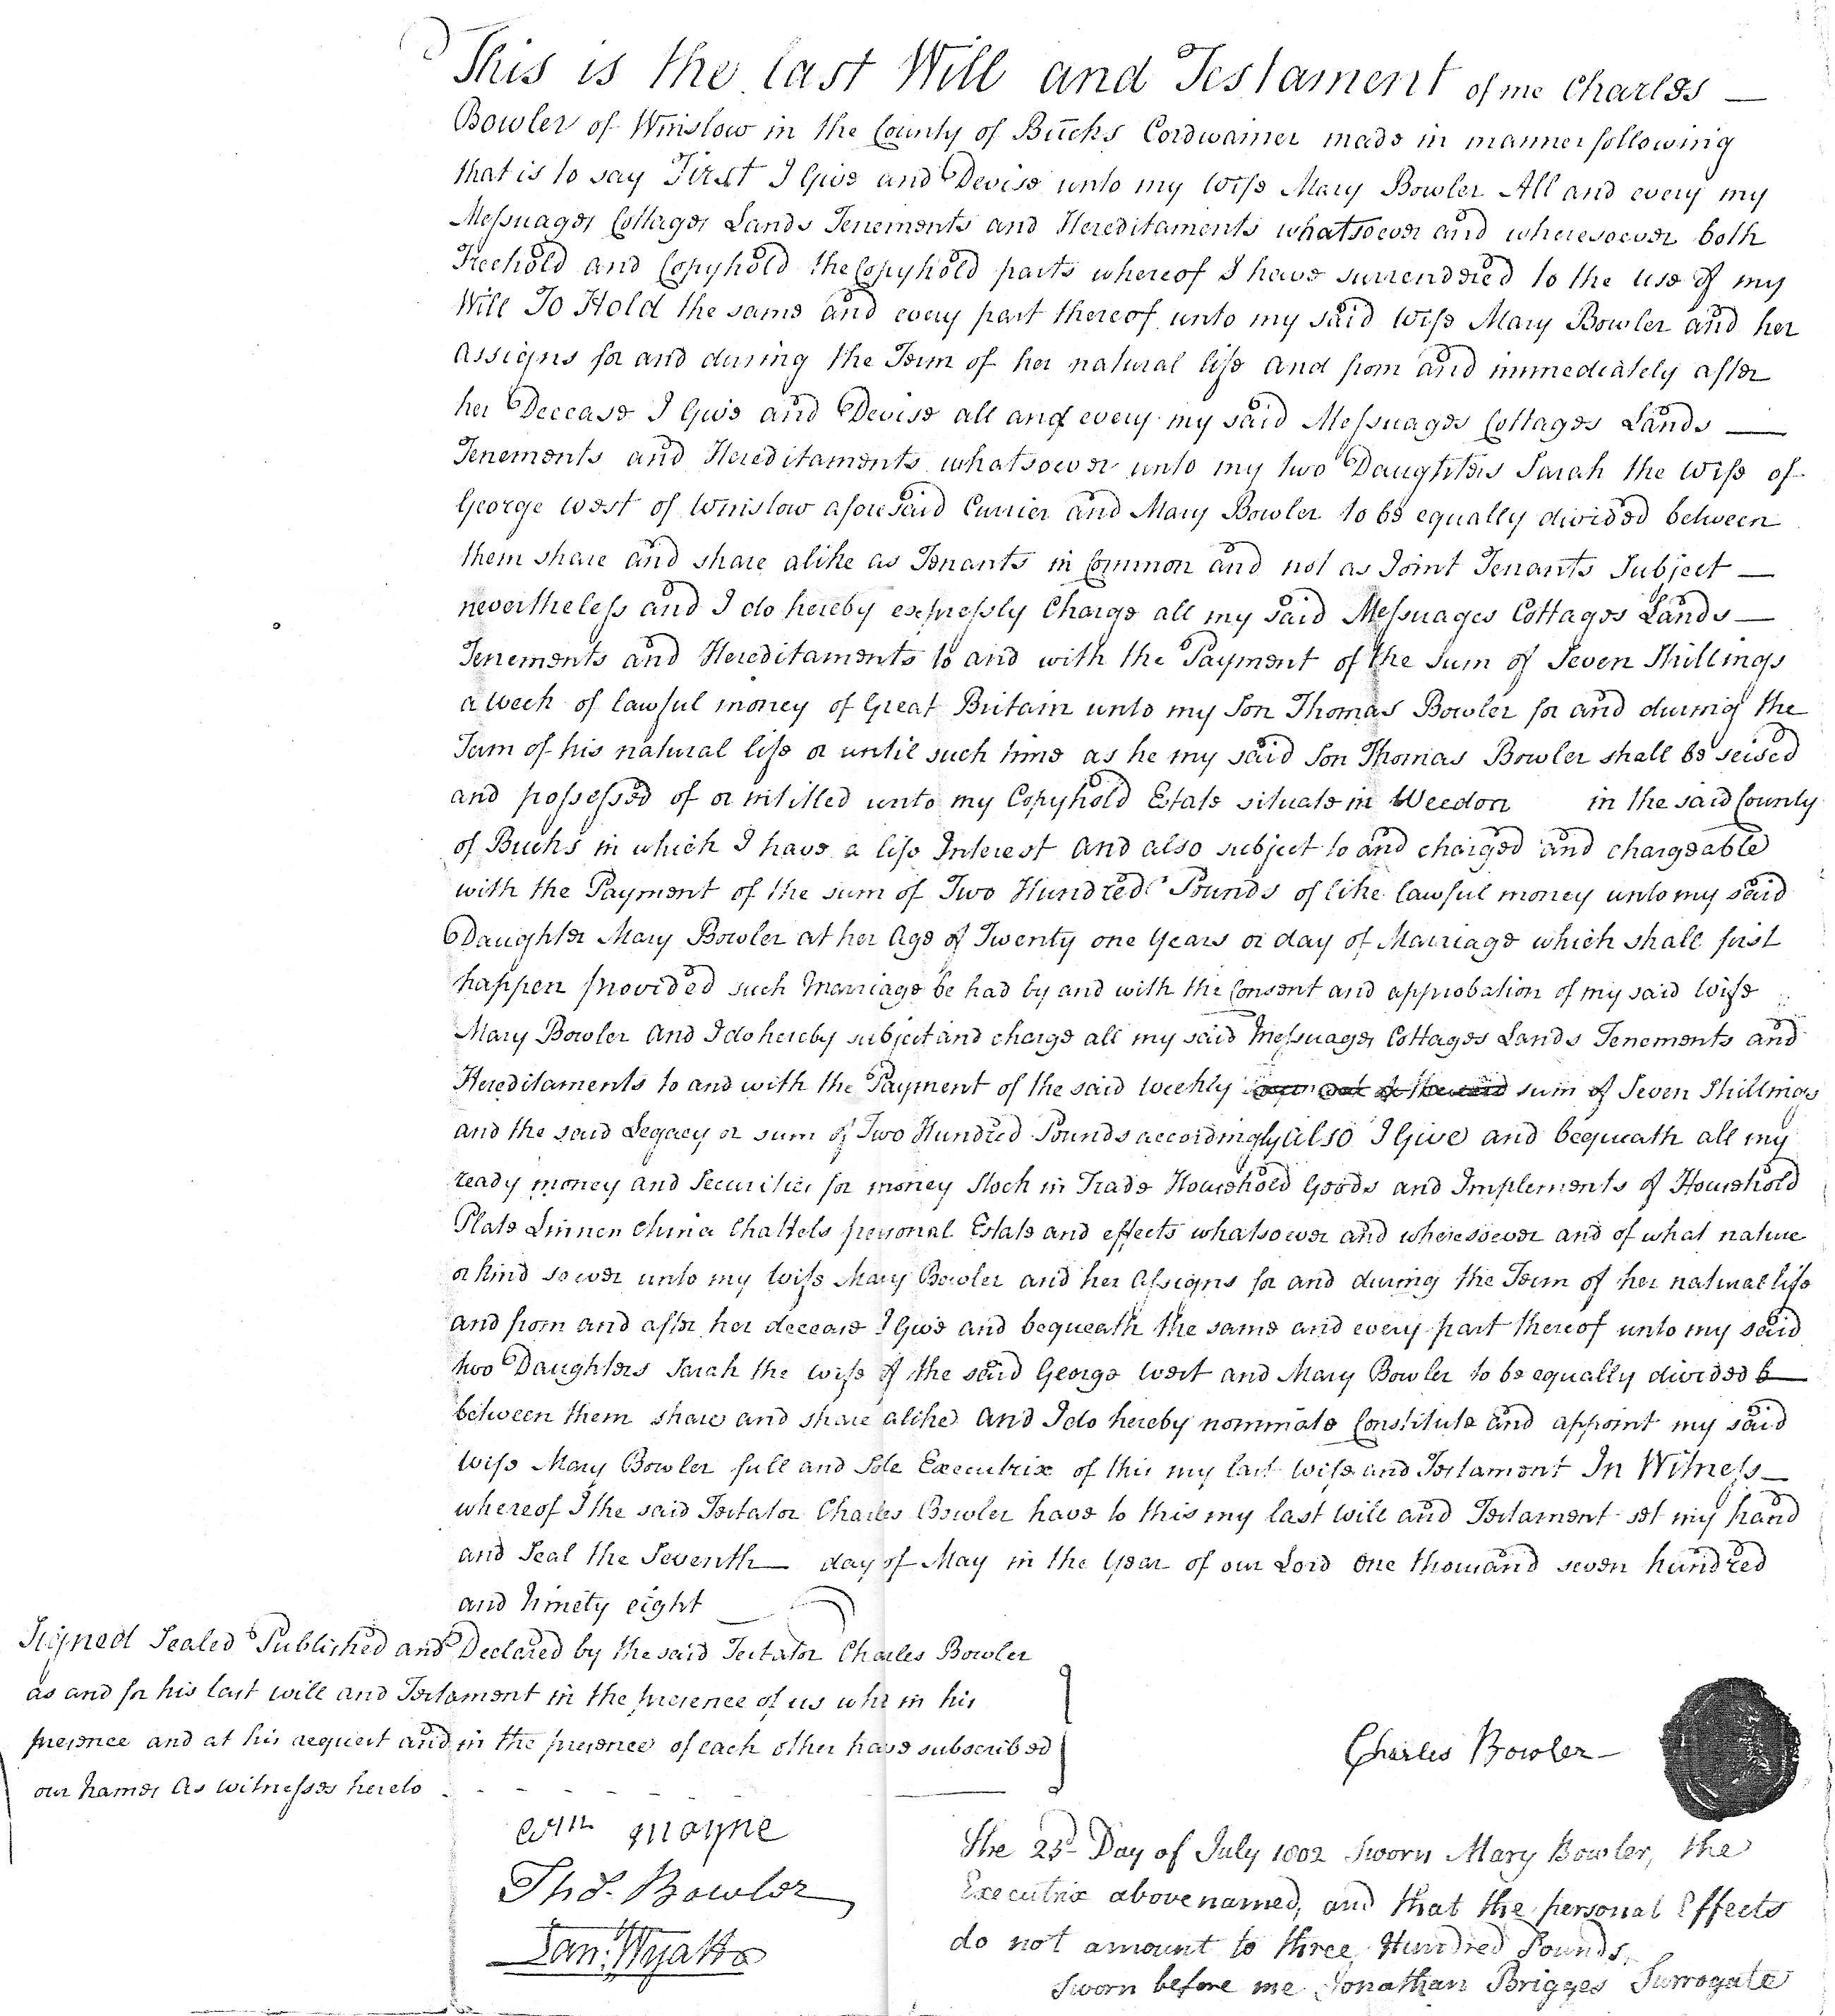 Will of Charles Bowler